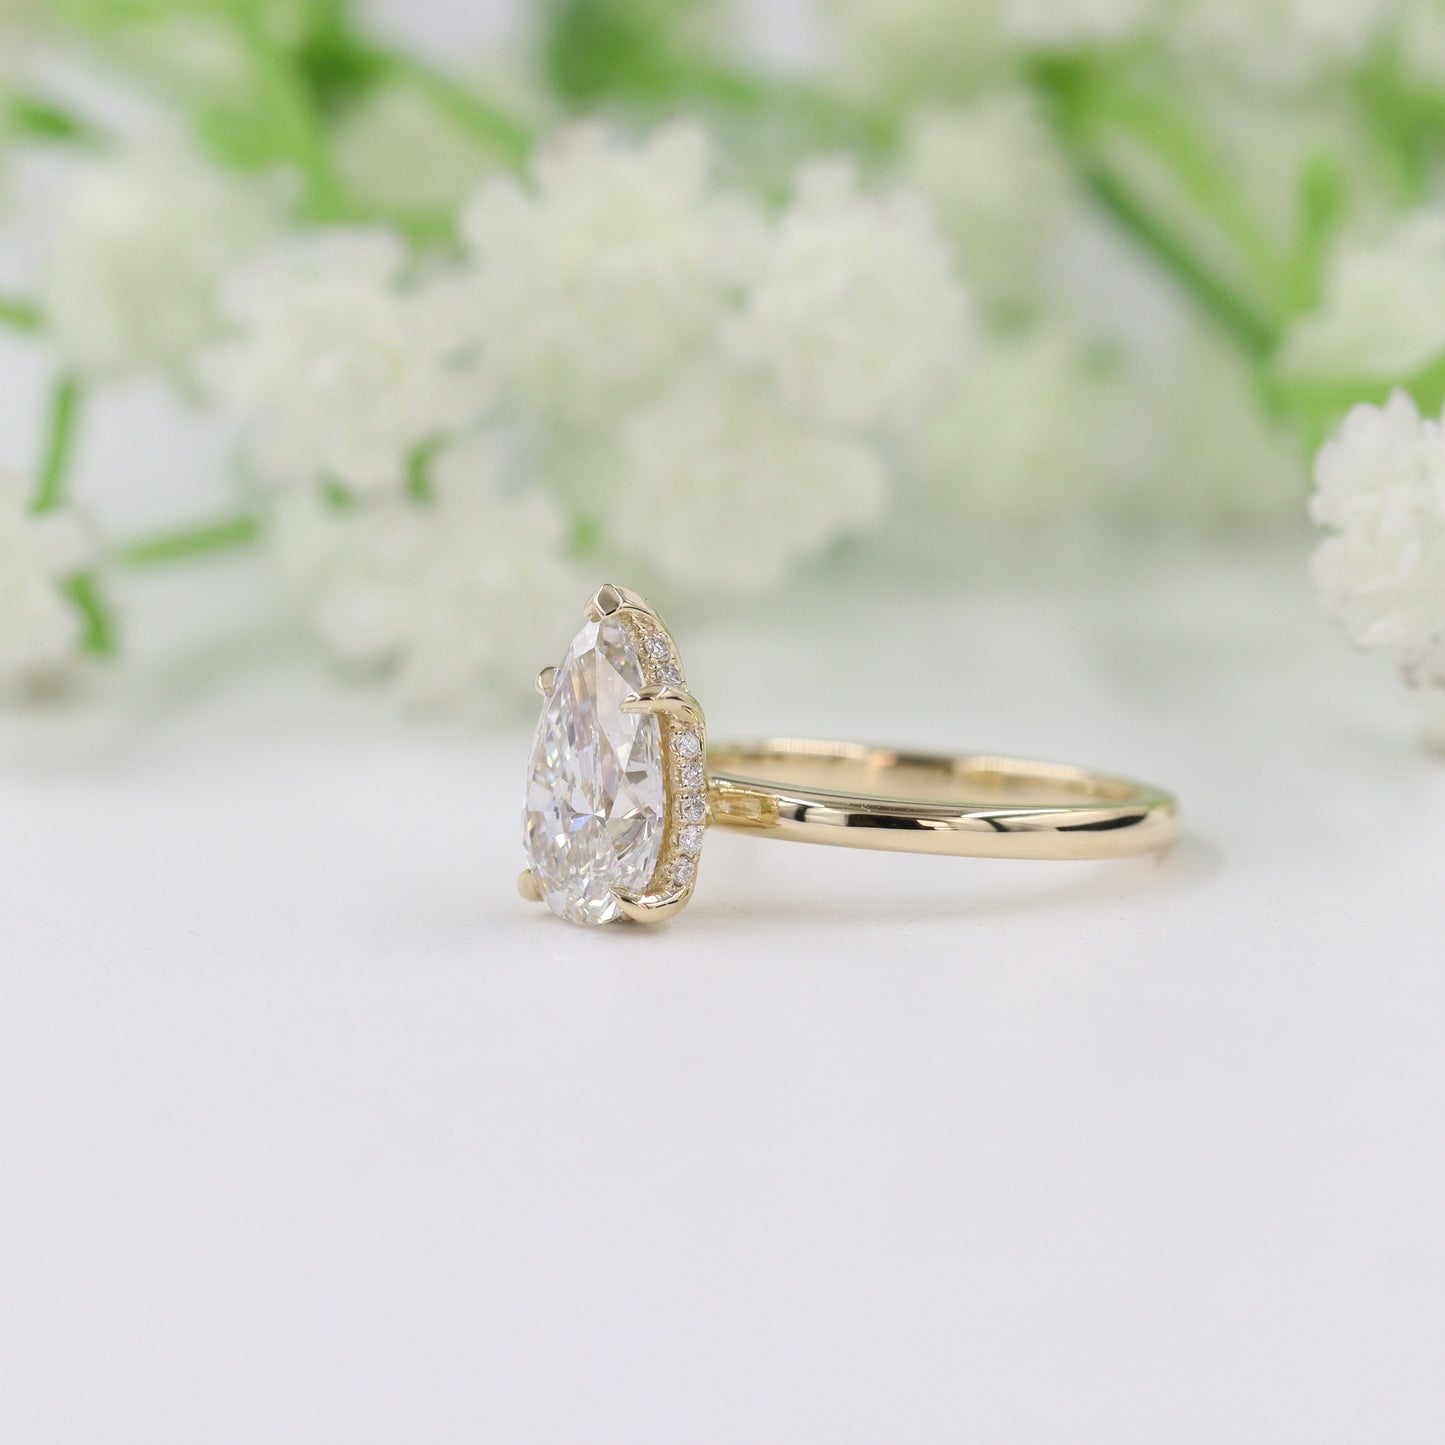 Pear Diamond Engagement Ring /Hidden Halo Band lGl Certified Amazing Brilliant Solitaire Ring/Pear Diamond Ring/Anniversary gift